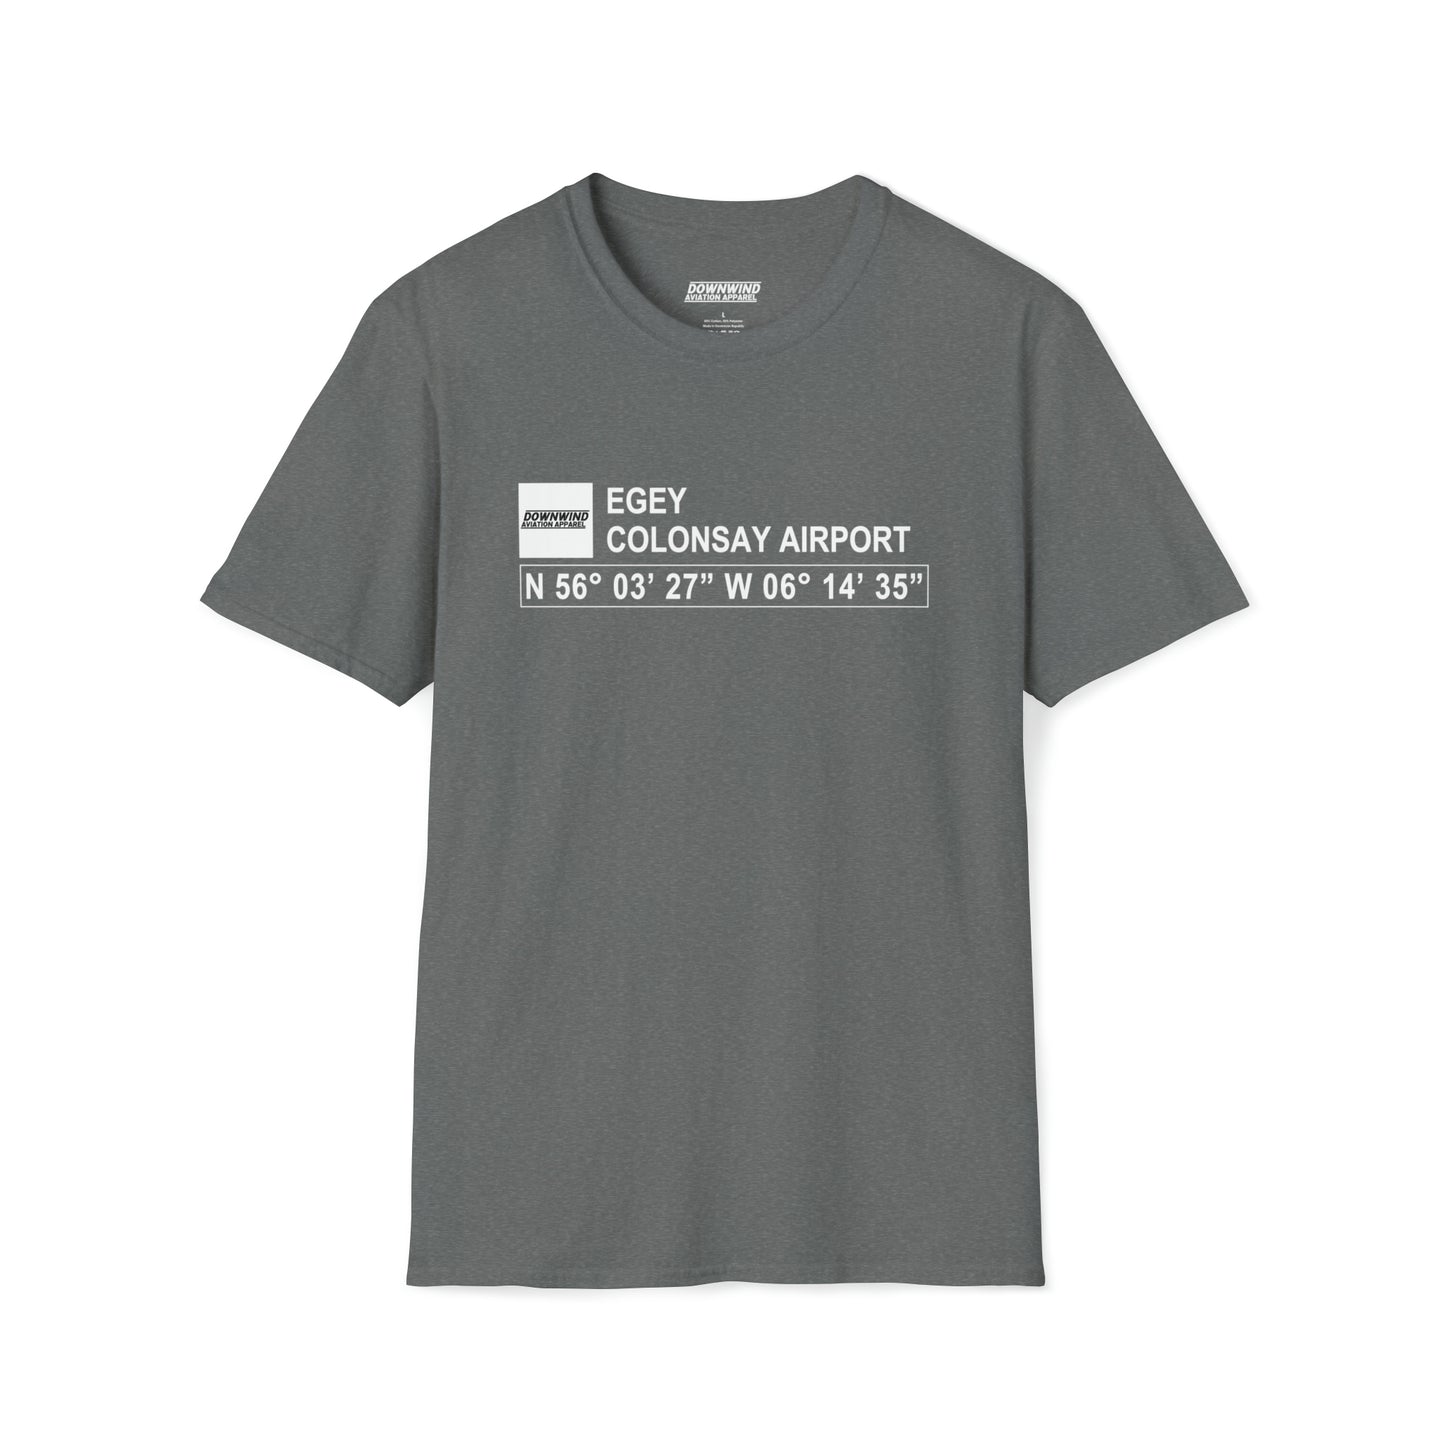 EGEY / Colonsay Airport T-Shirt